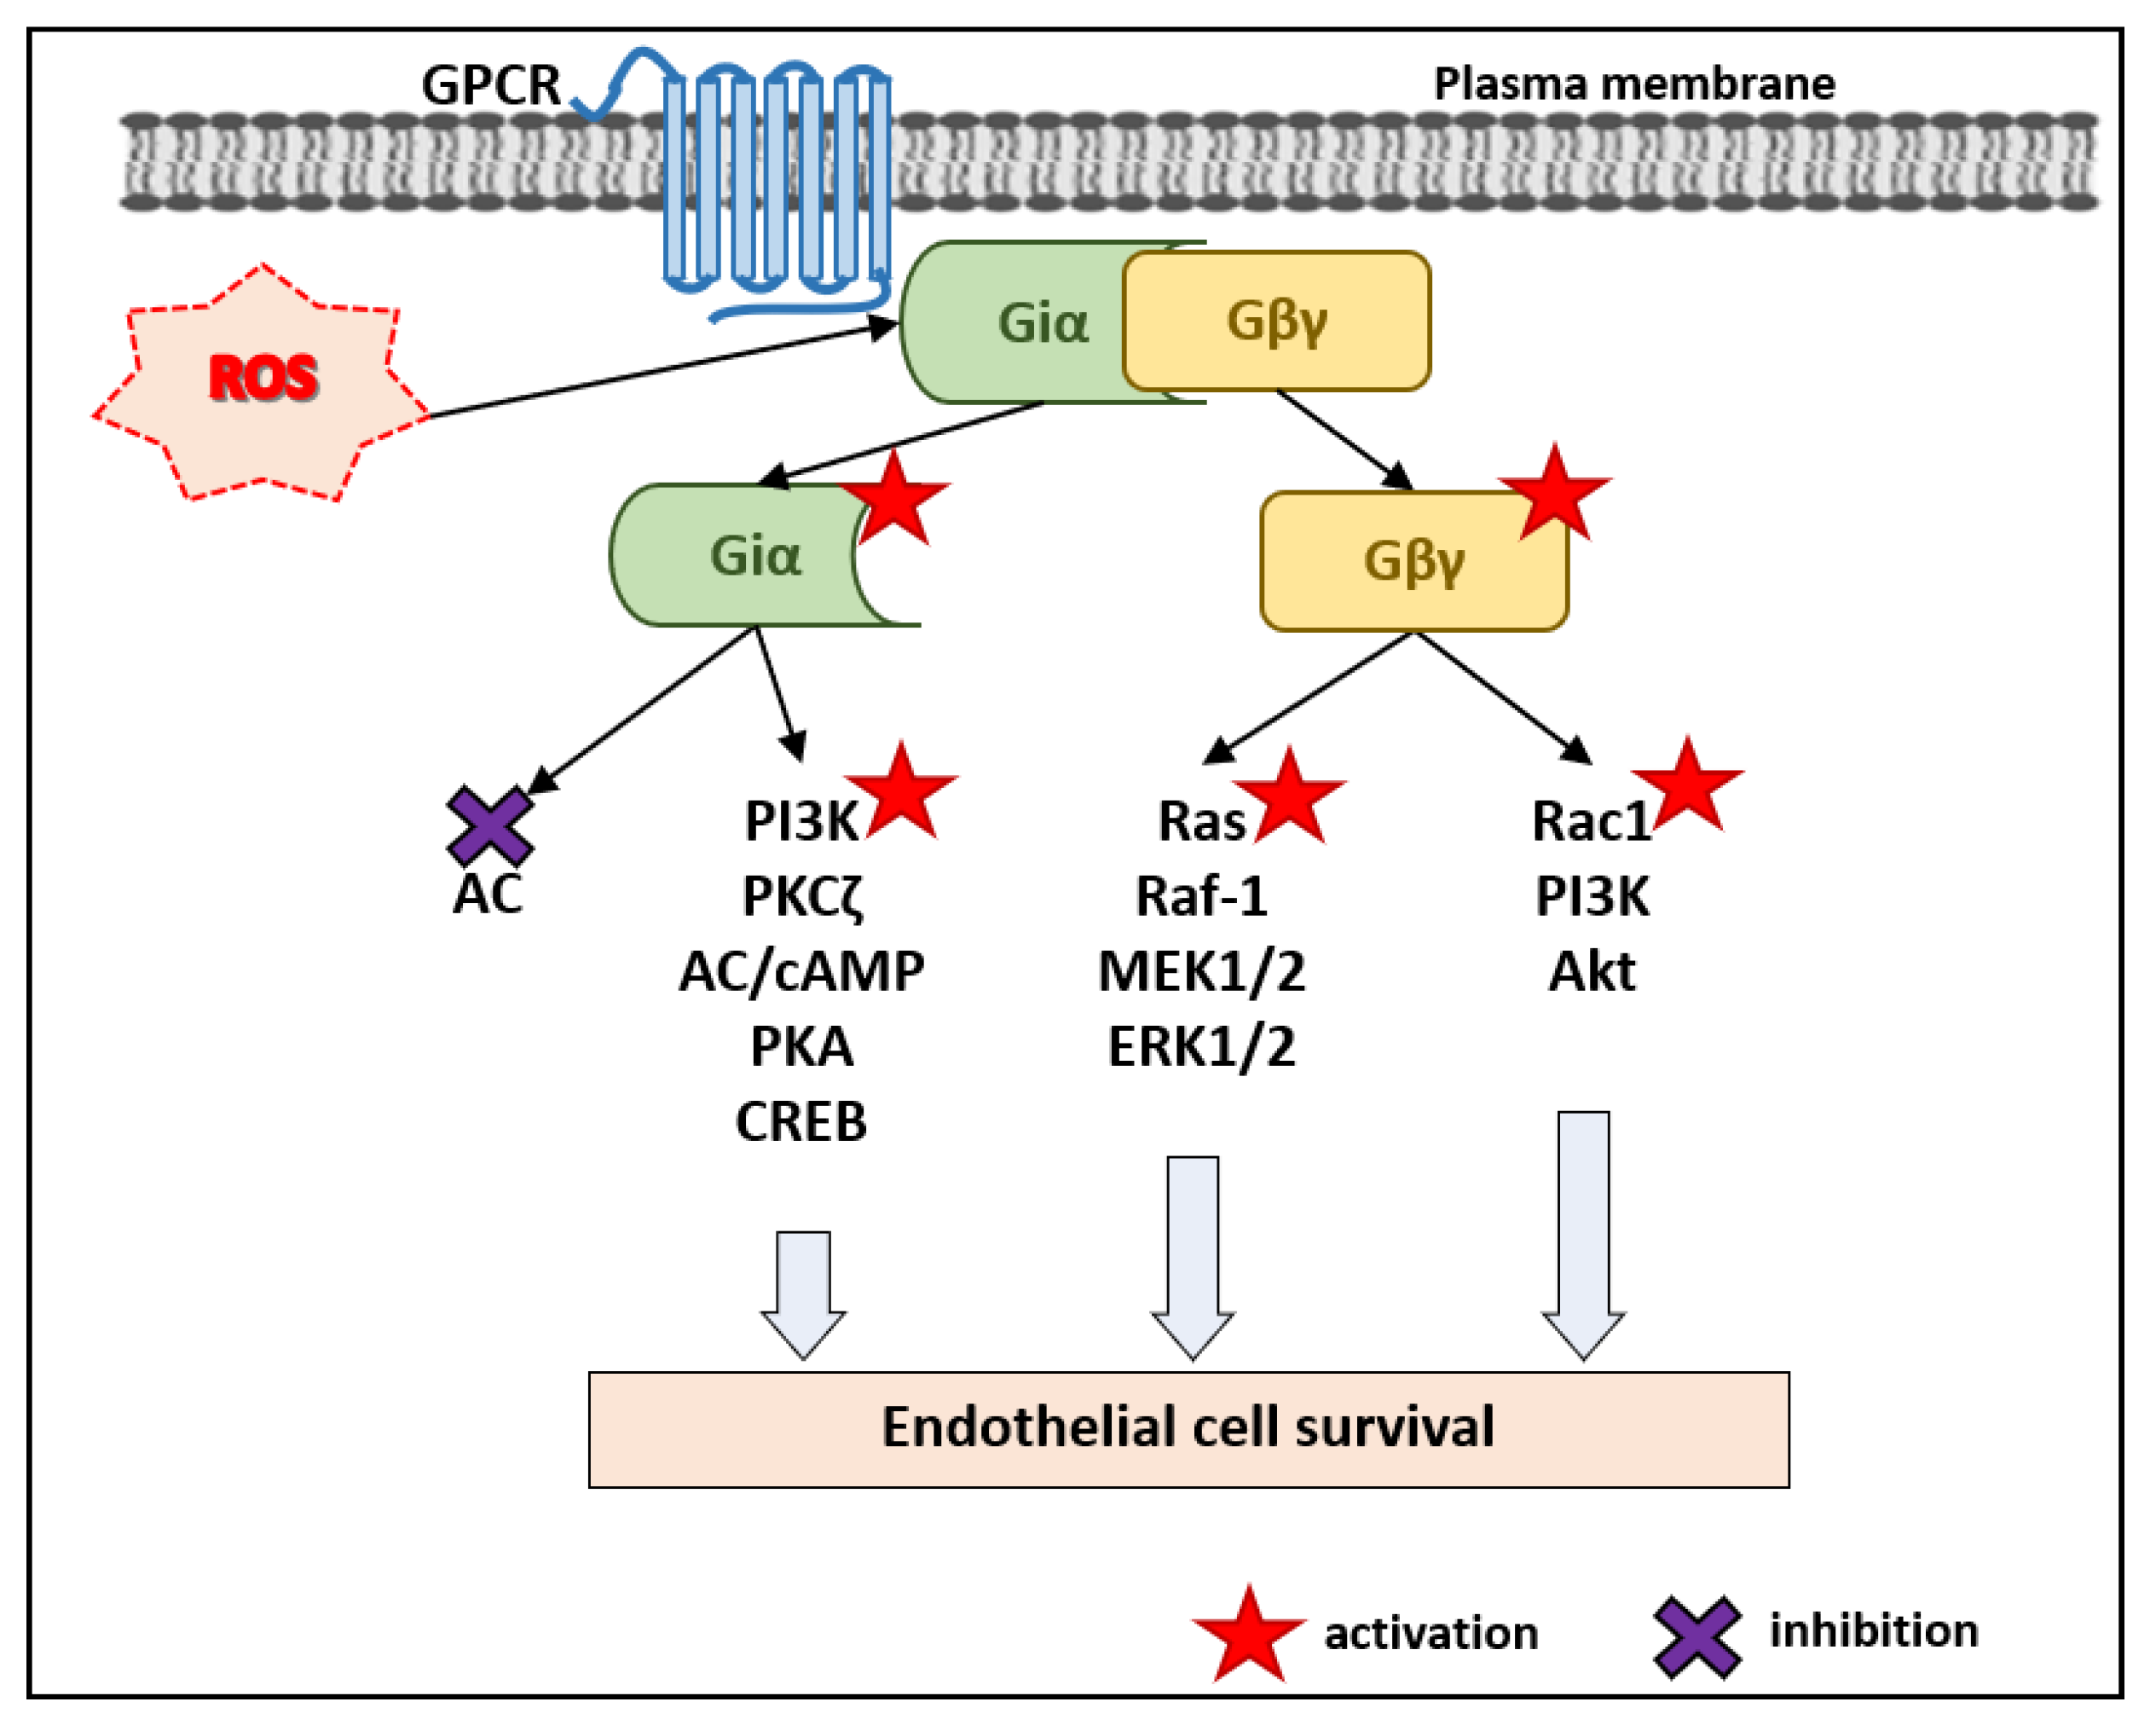 Antioxidants | Free Full-Text | Pleiotropic and Potentially Beneficial  Effects of Reactive Oxygen Species on the Intracellular Signaling Pathways  in Endothelial Cells | HTML